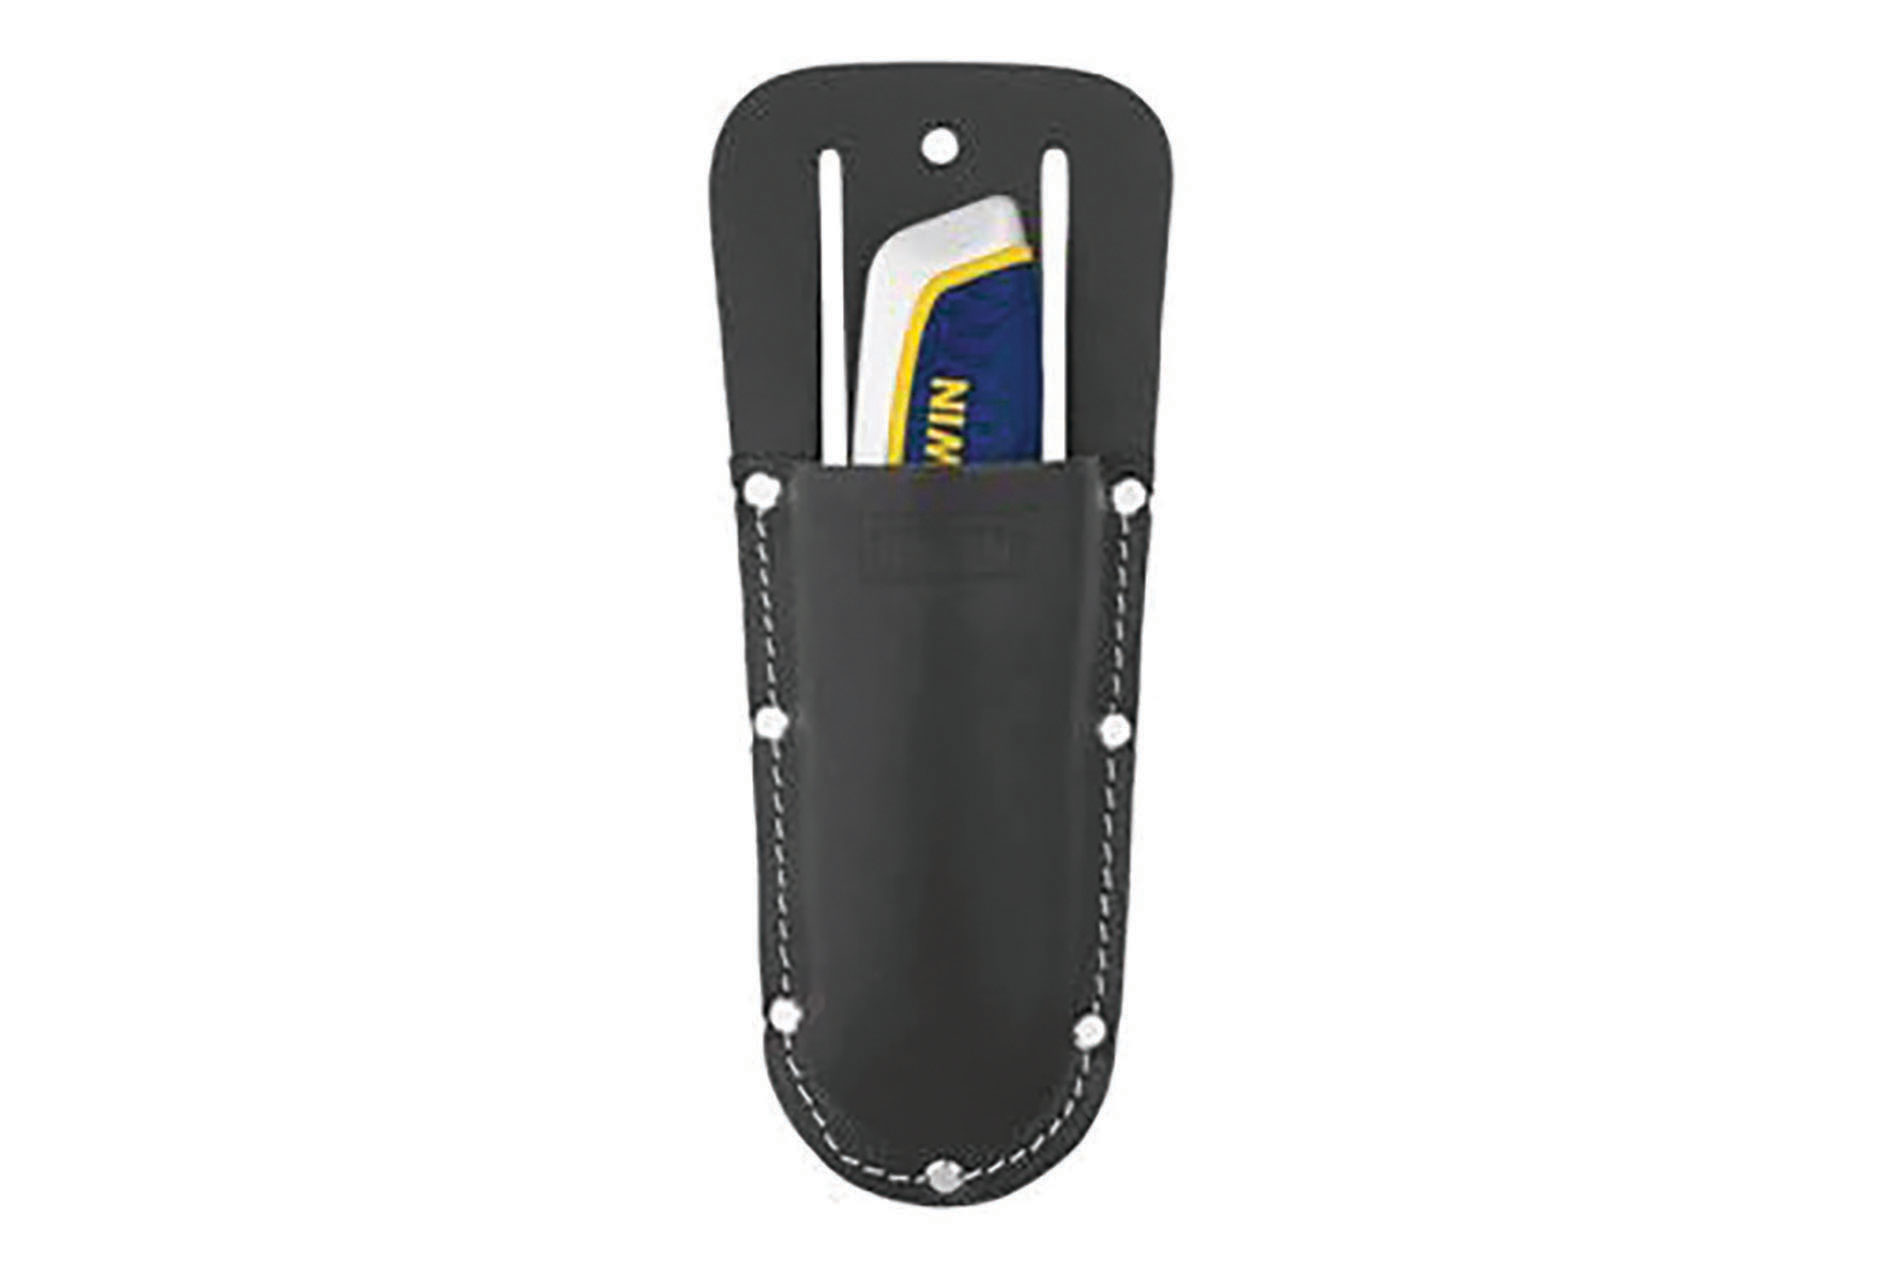 Black knife holder with a knife with a blue and yellow handle. Image by Irwin Tools.